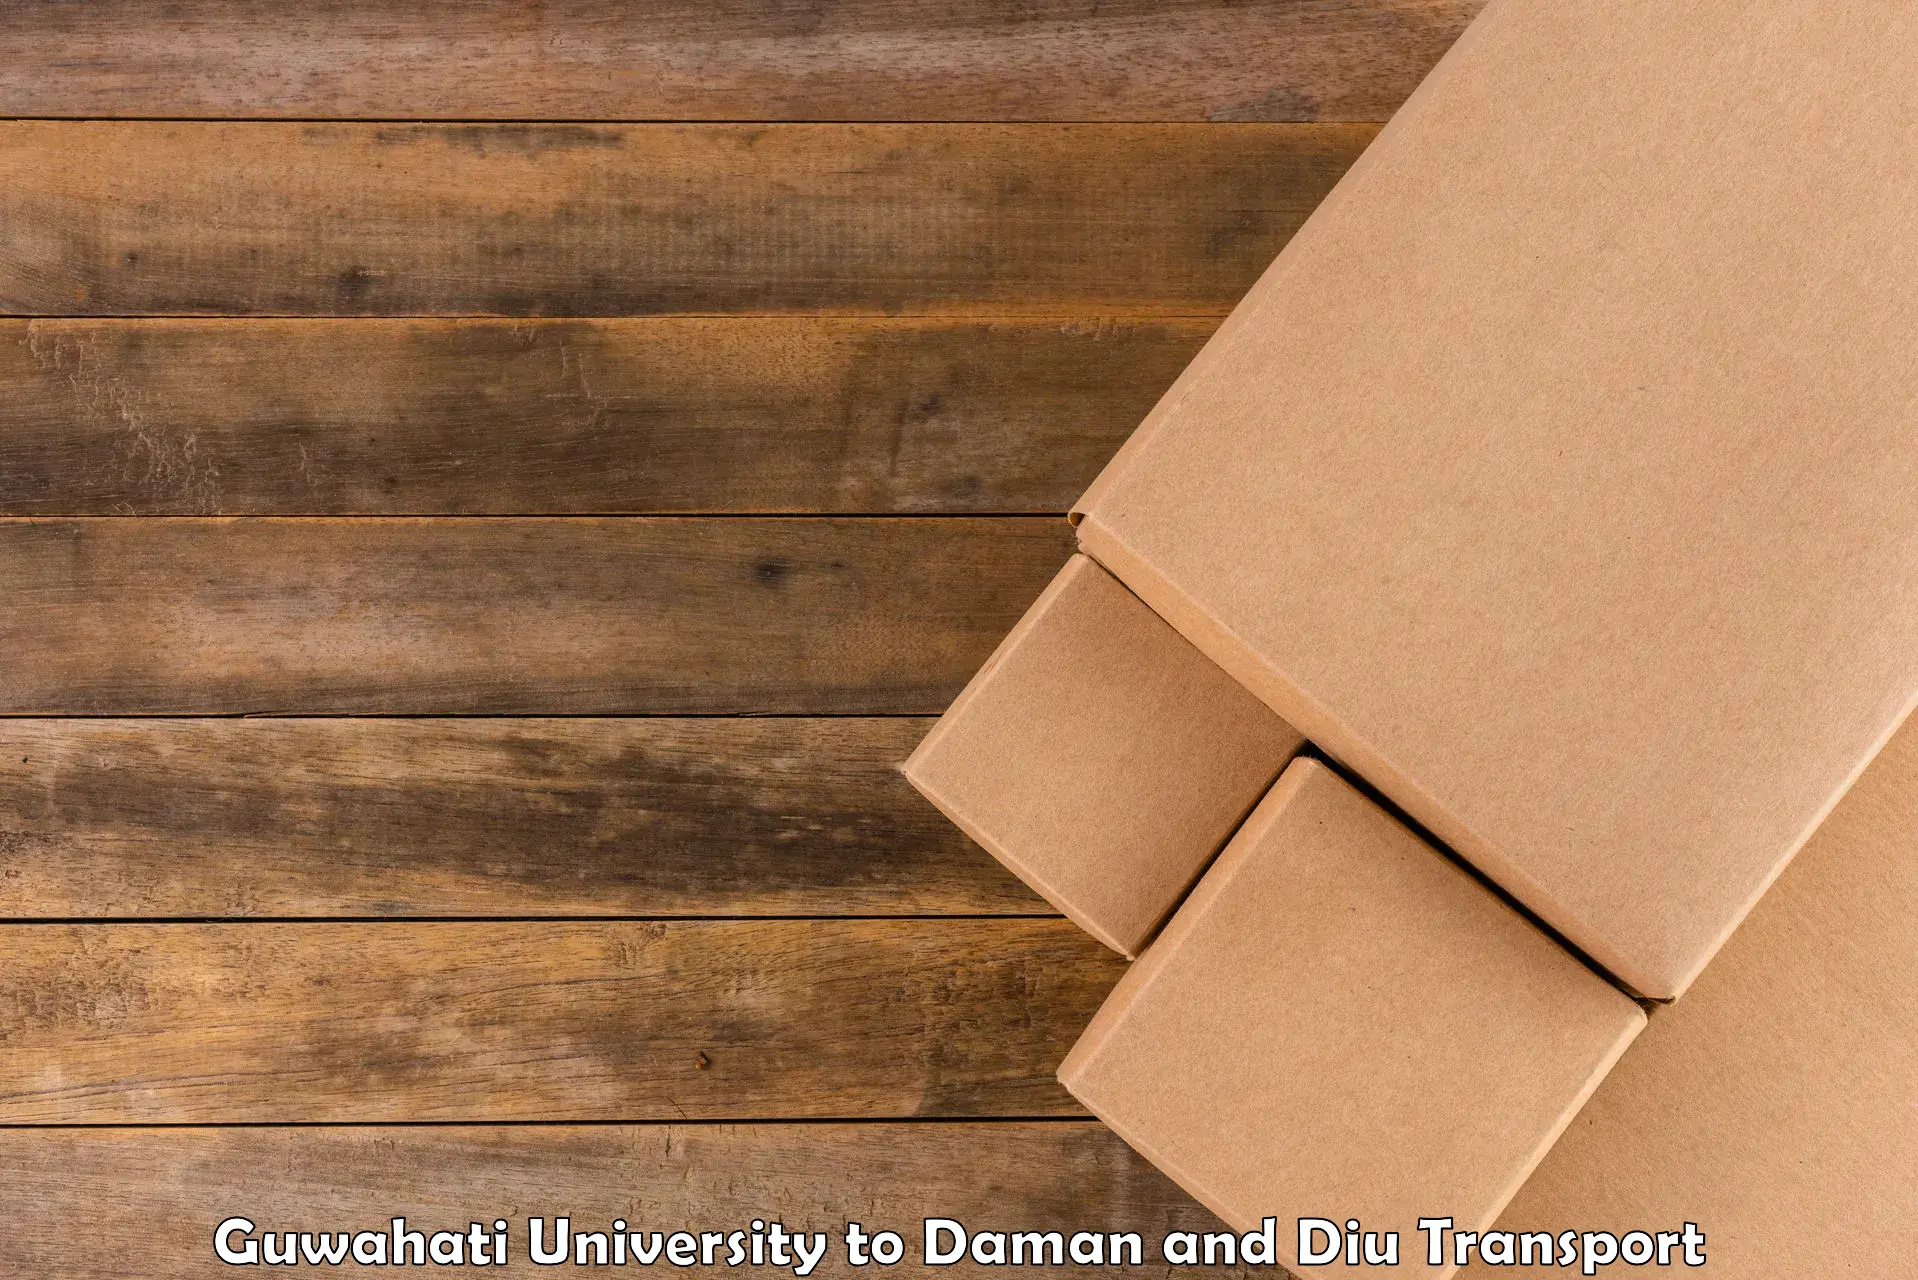 Container transport service in Guwahati University to Daman and Diu